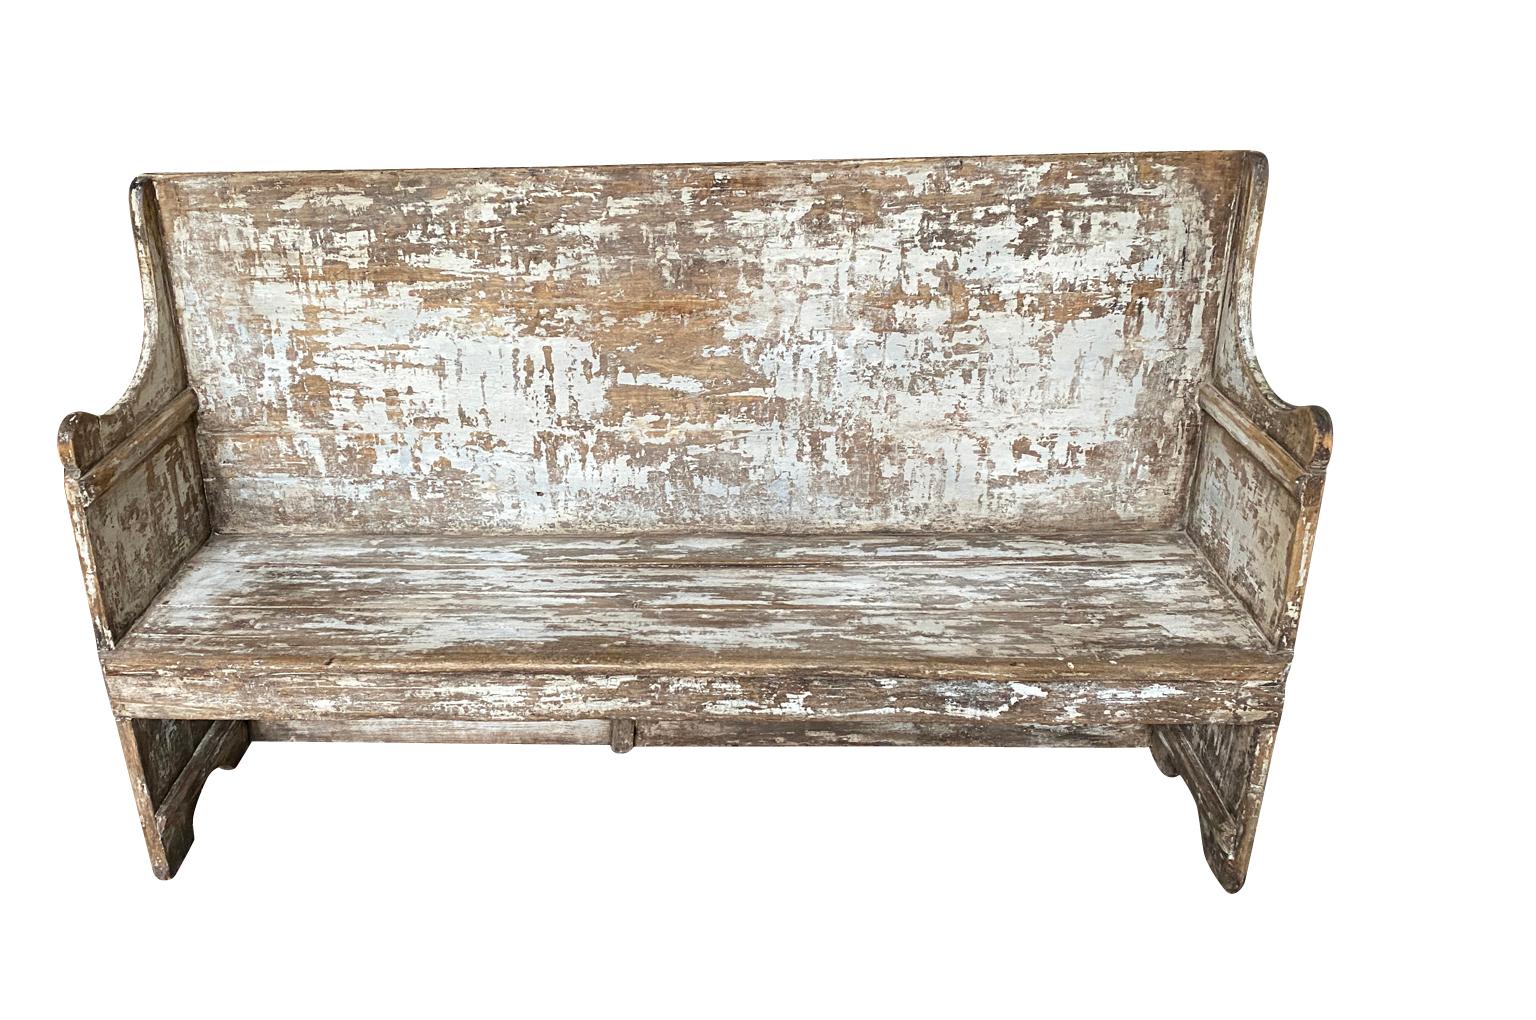 A rustic mid-19th century Banquette - Bench from the Catalan region of Spain.  Soundly constructed from sturdy painted wood.  Terrific patina and finish.  Seat height is 18